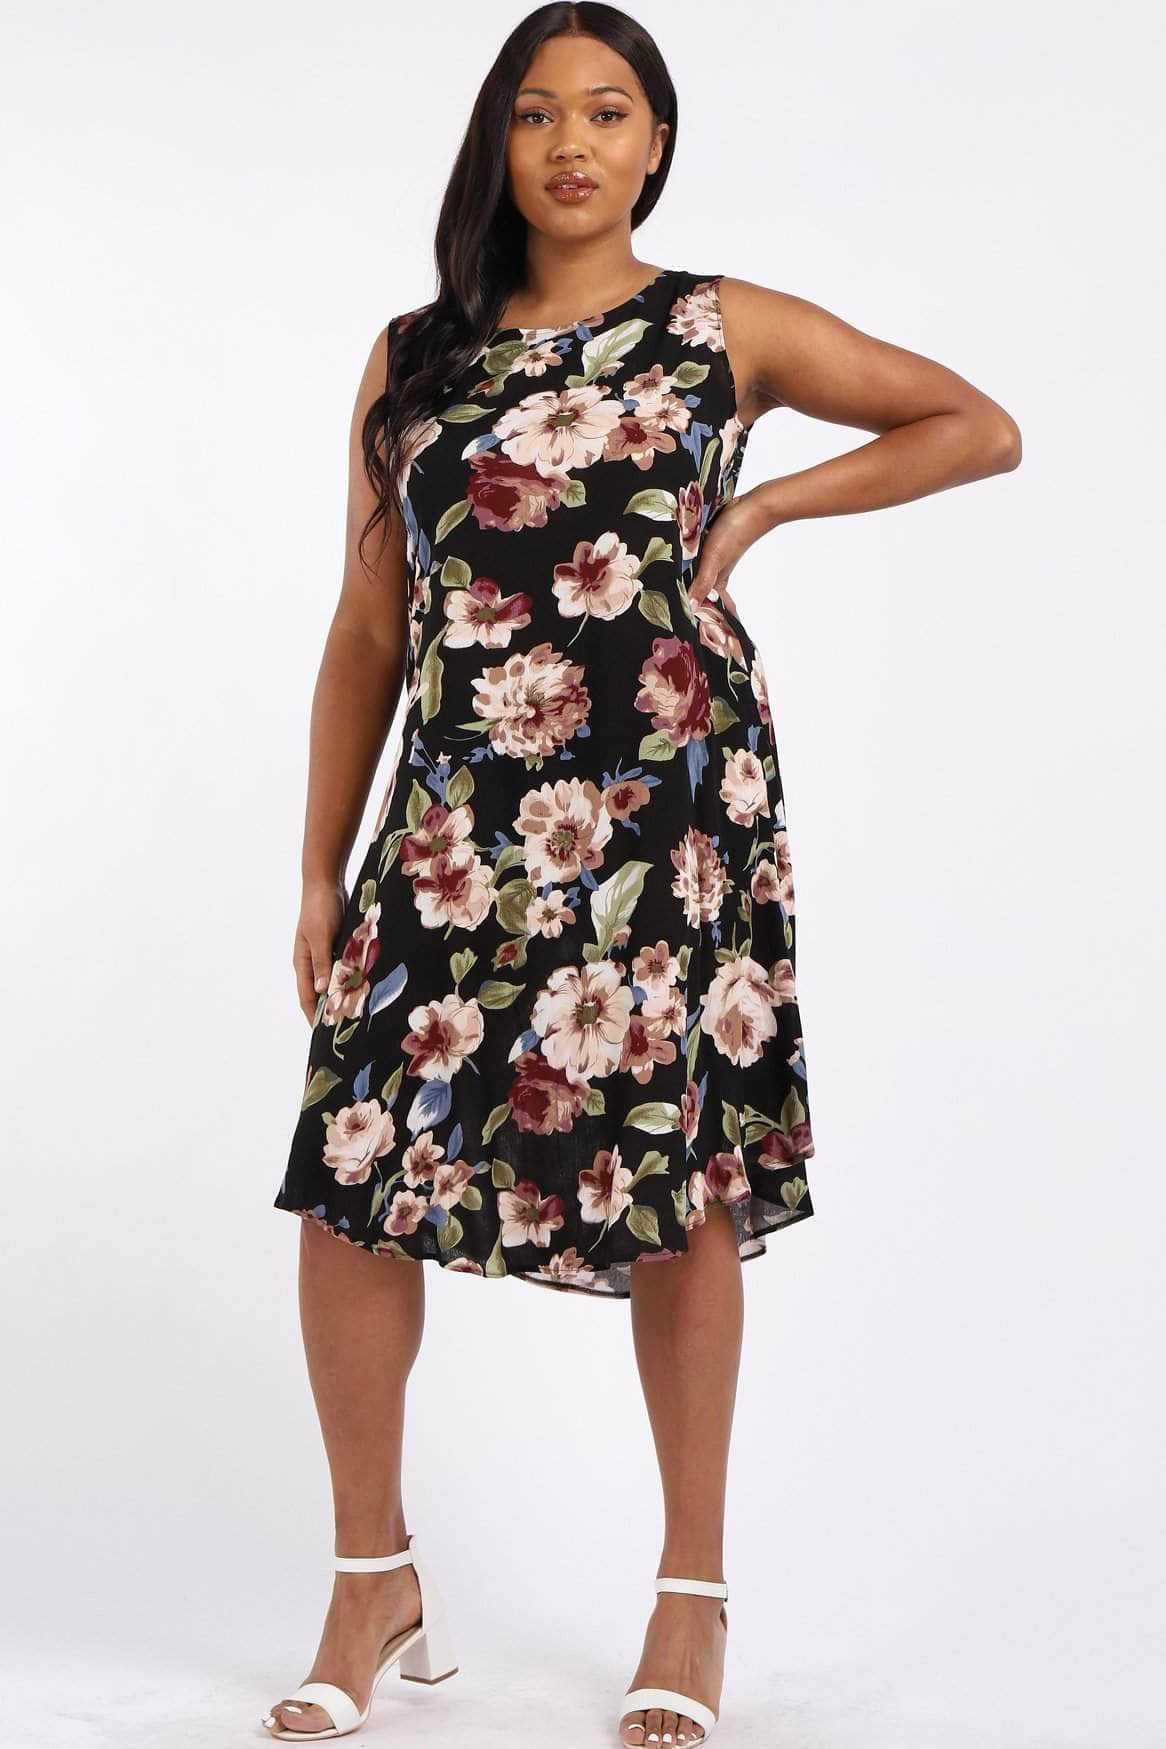 Saloos Dress 12 Floral Sleeveless Midi-Dress with Necklace